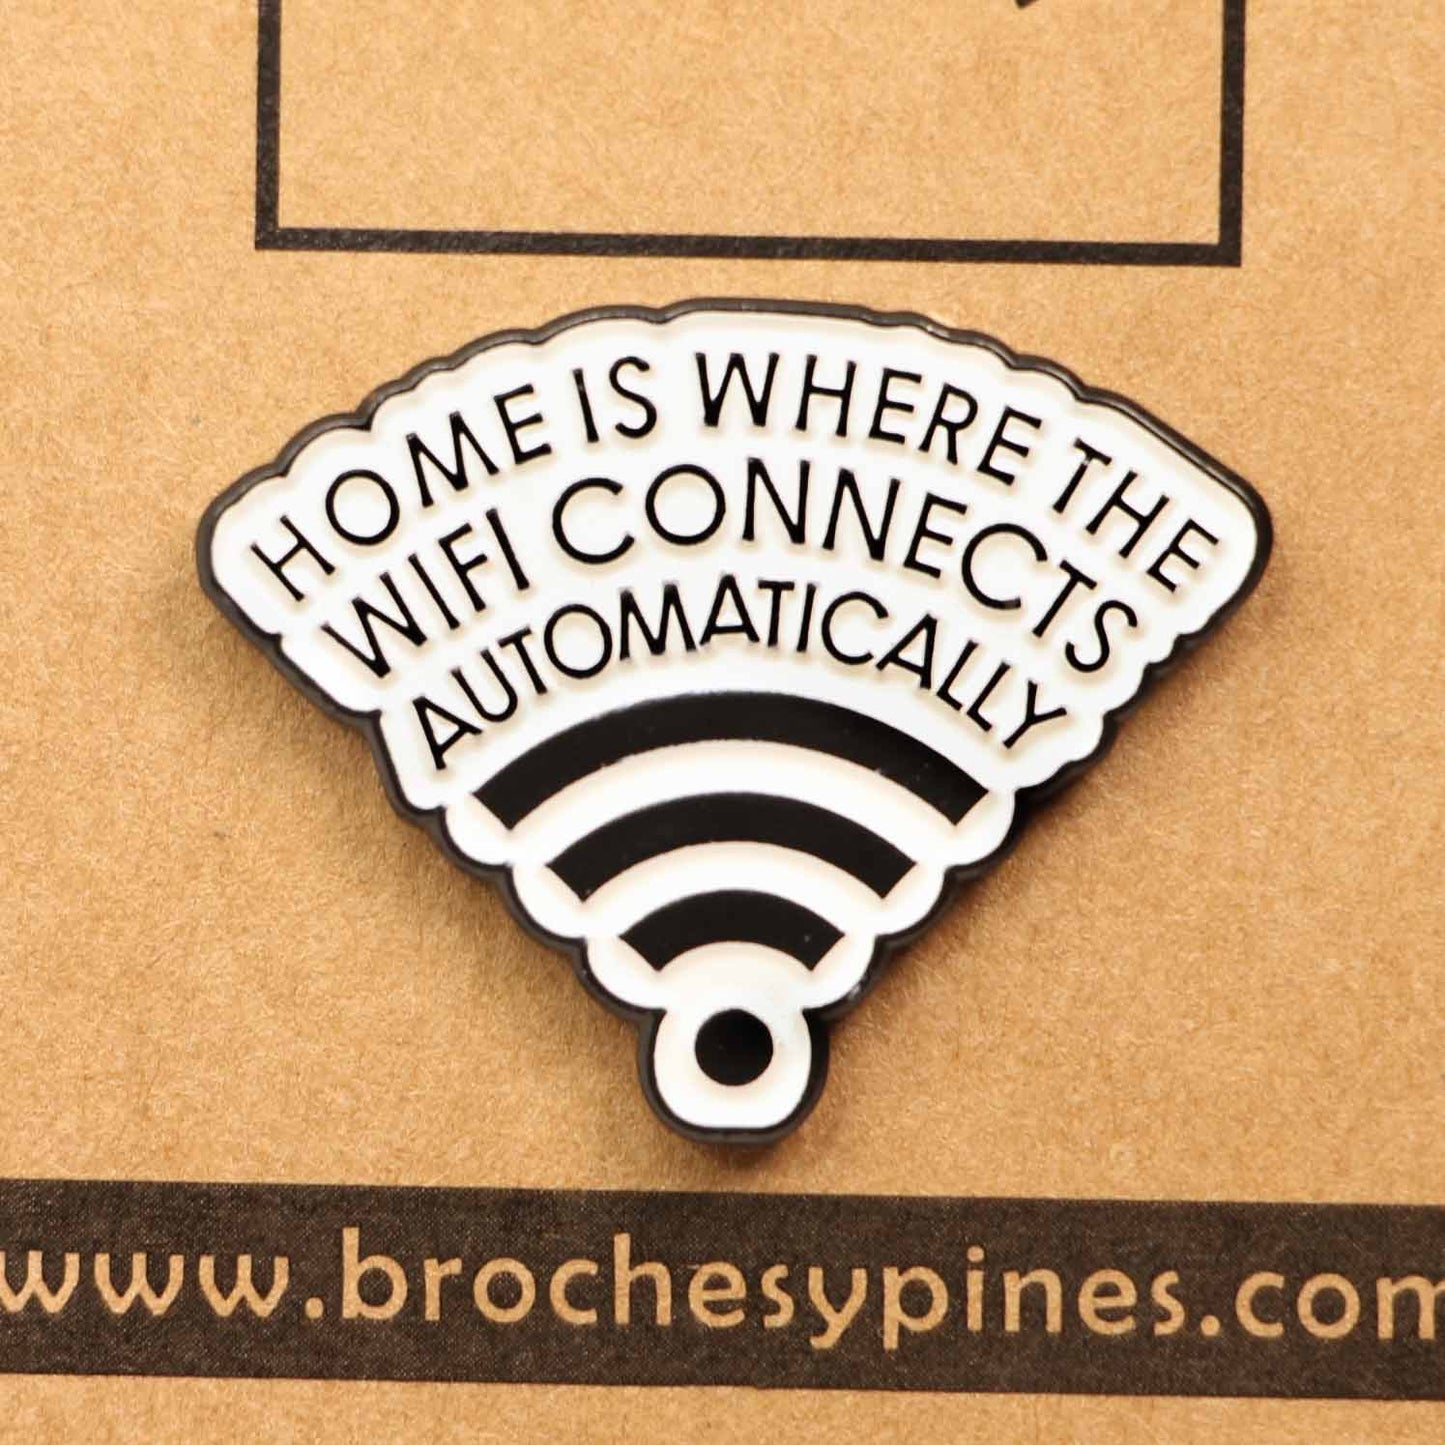 Pin "Home Is Where The Wifi Connects Automatically" - Frases